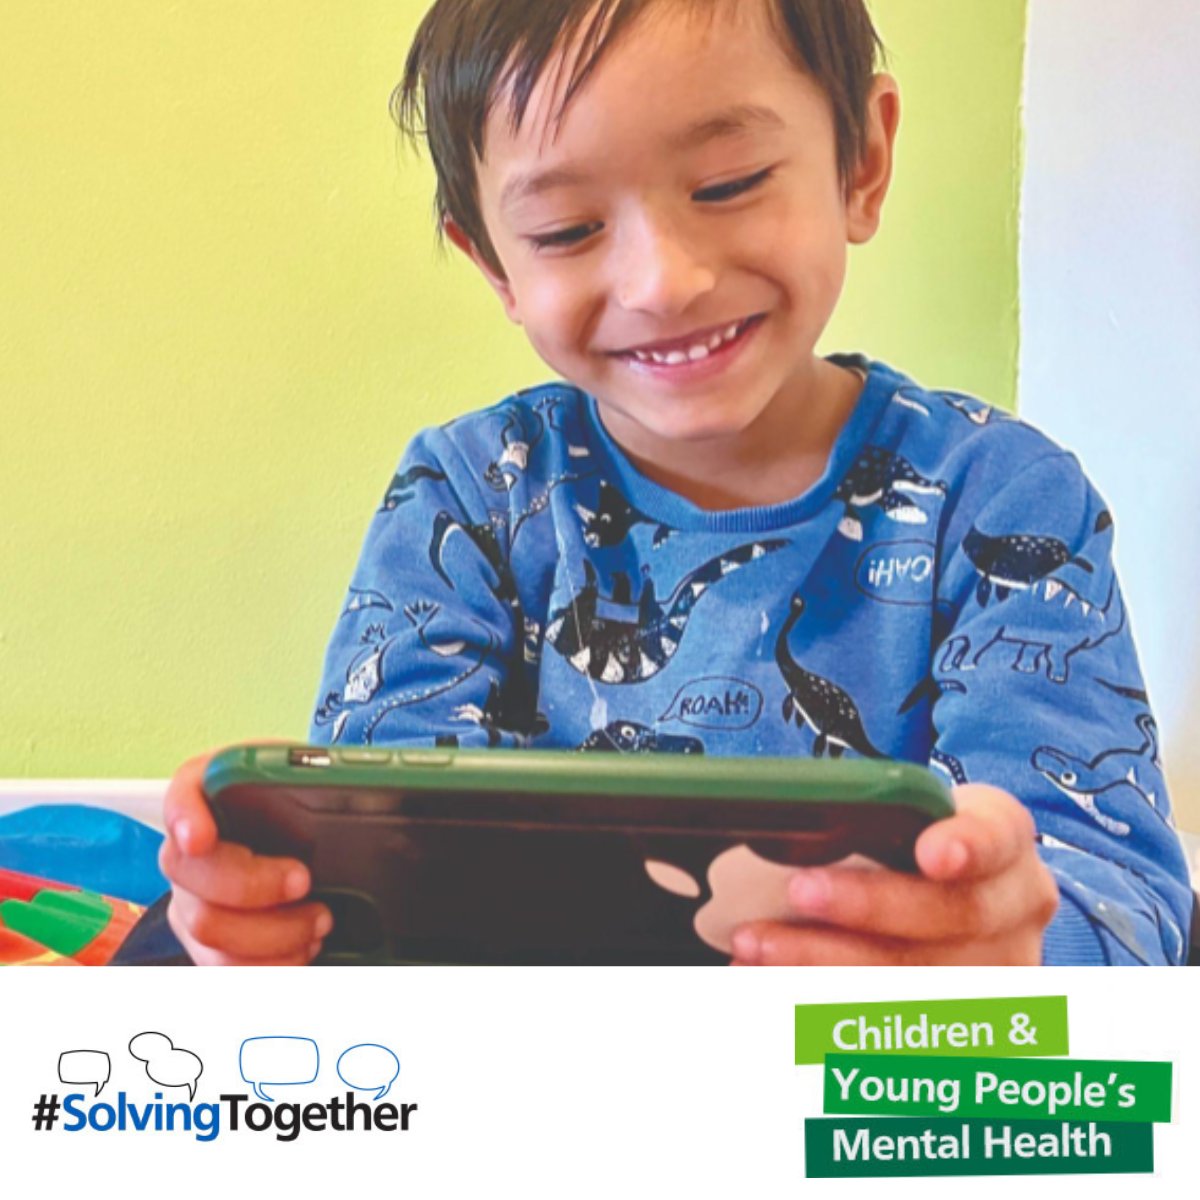 Access to #mentalhealth support varies dramatically due to the postcode lottery. Digital services present an avenue to reach underserved children where F2F services are not available or feel a challenge to access. Help us, help more #CYPs. Join the #SolvingTogether conversation.